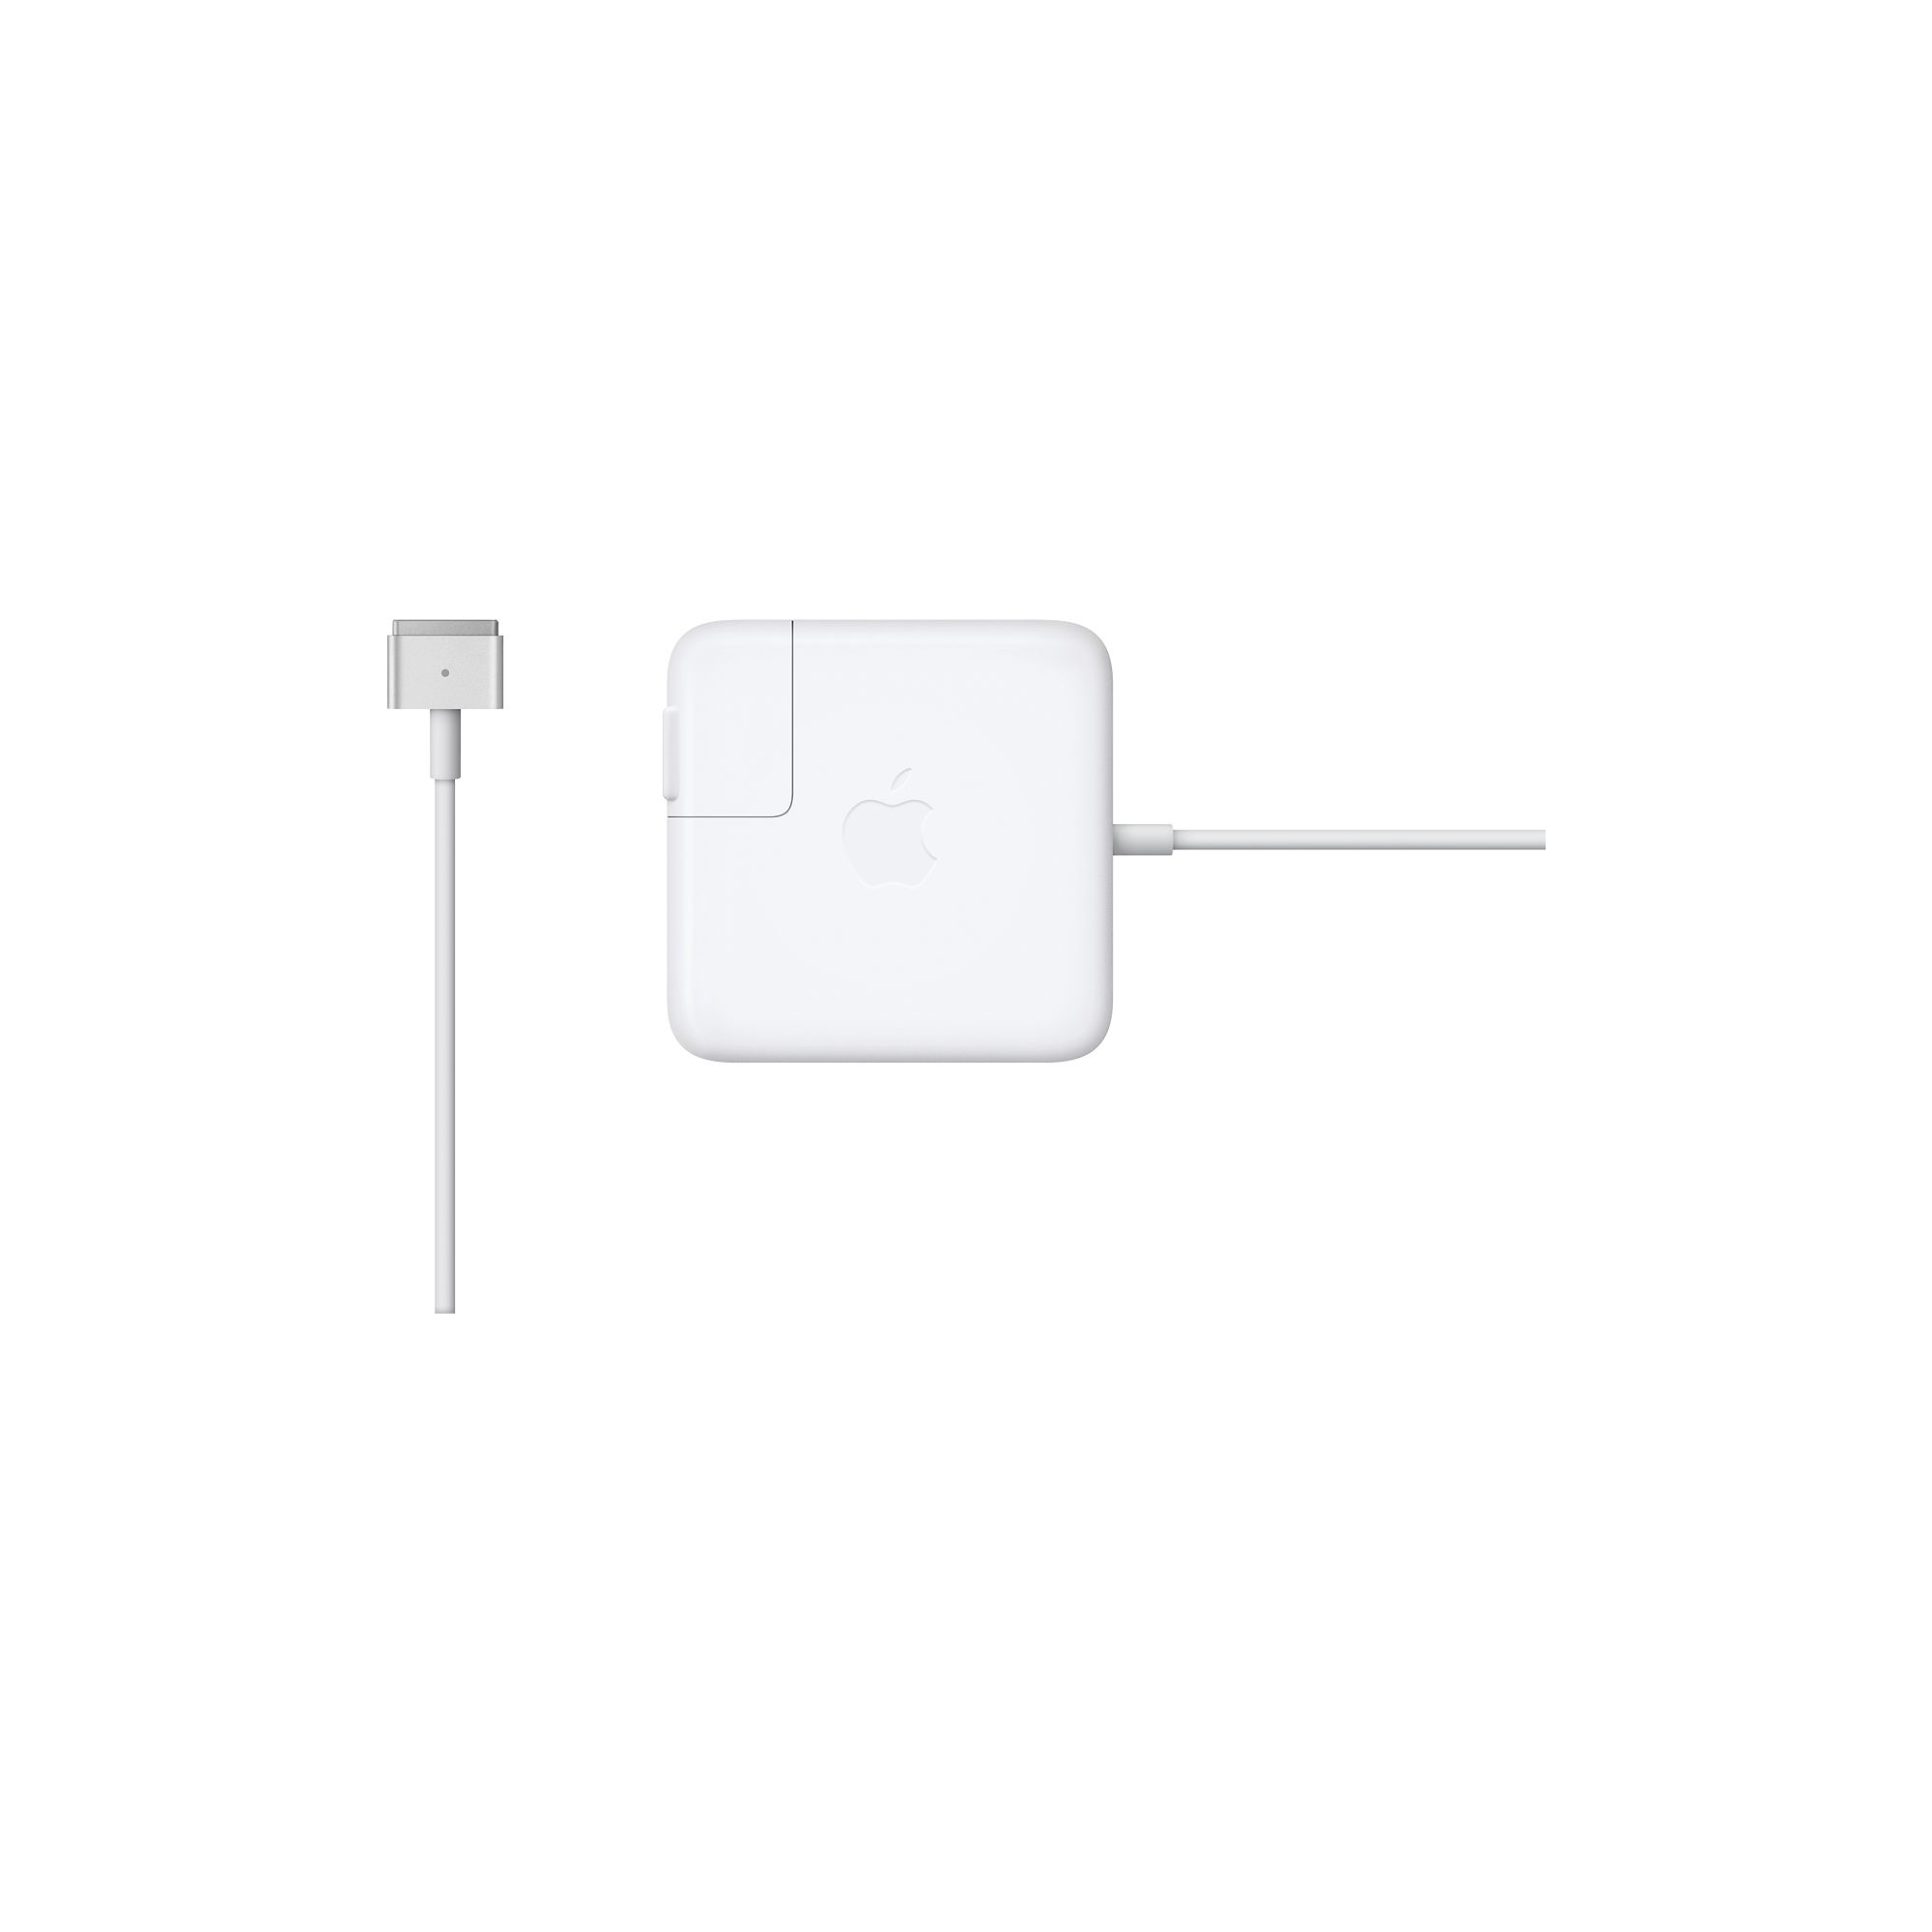 Apple MagSafe Charger 60w 2 for Macbook Pro 13 inch Retina